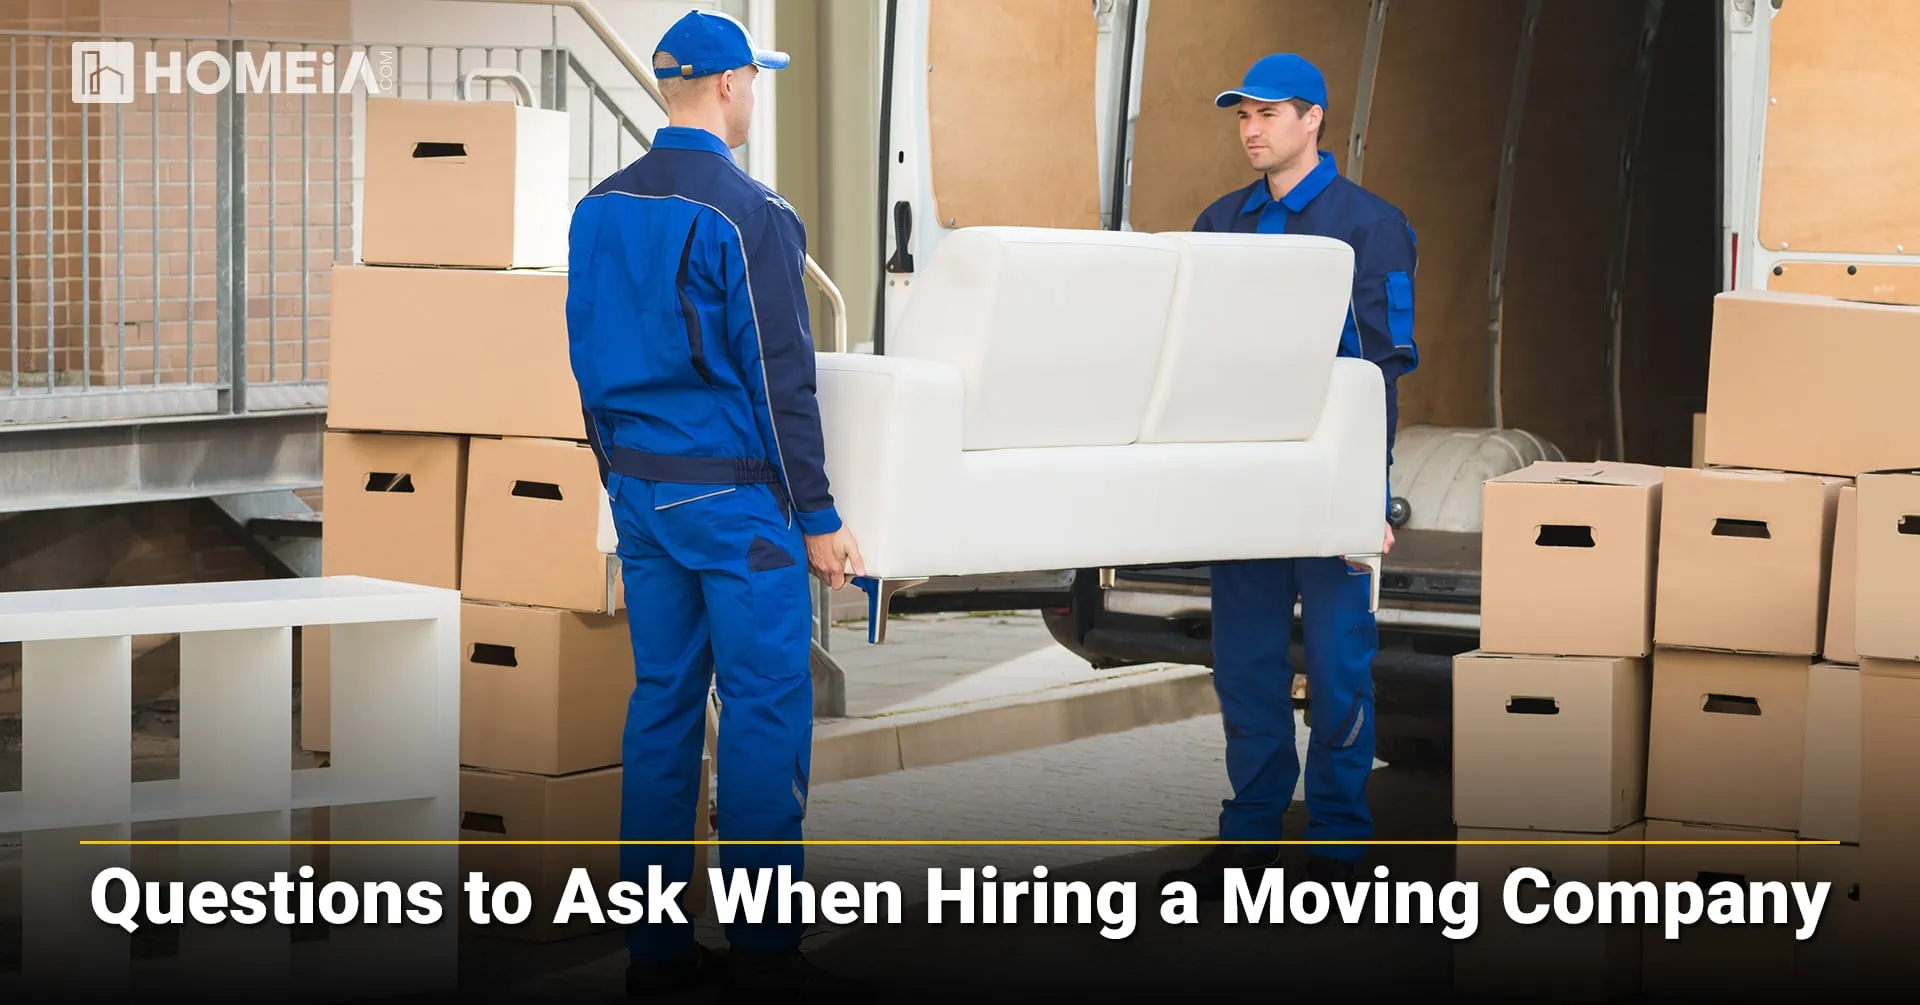 Questions to Ask When Hiring a Moving Company